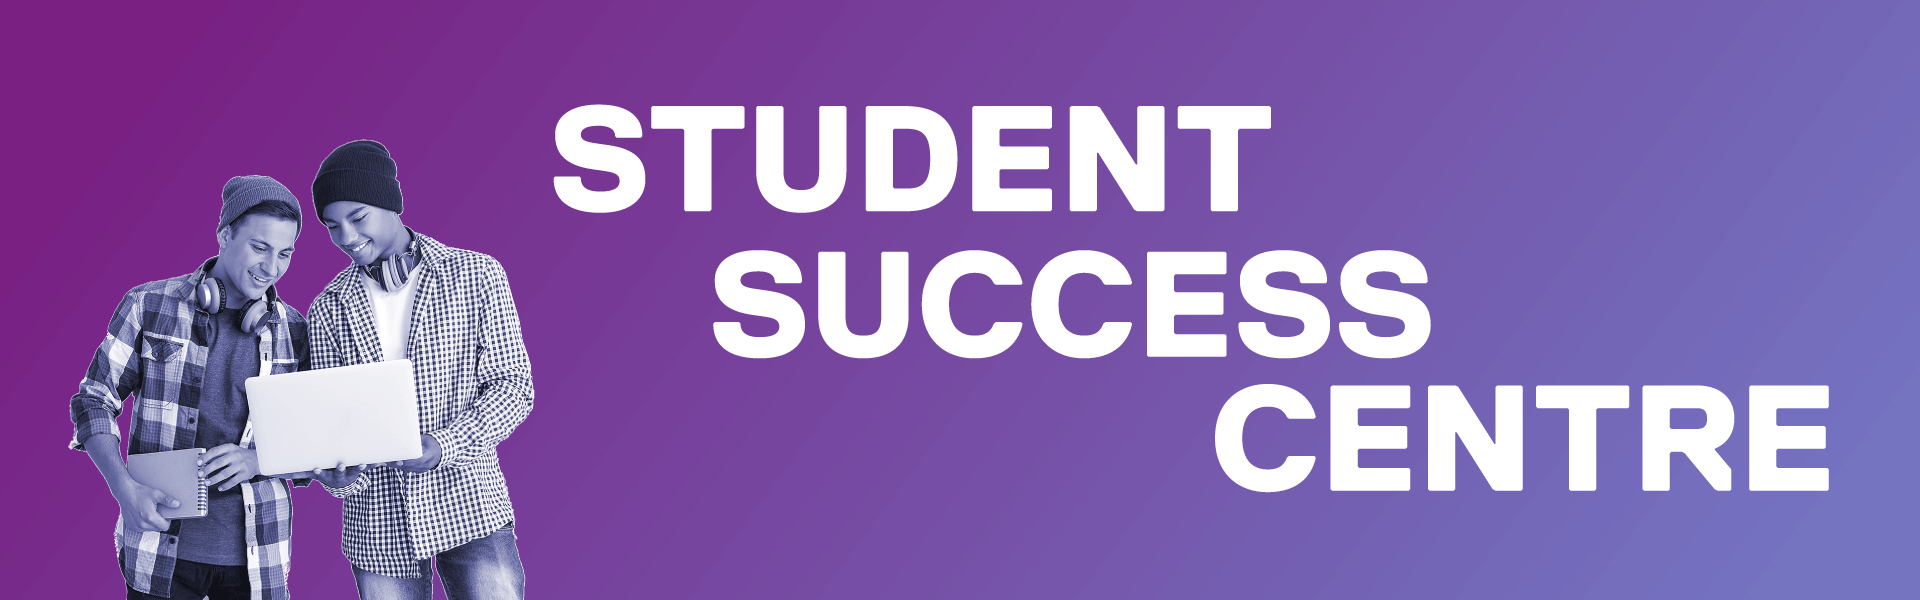 Student Success Centre  is written on a purple gradient with a group of students looking at a laptop on the left